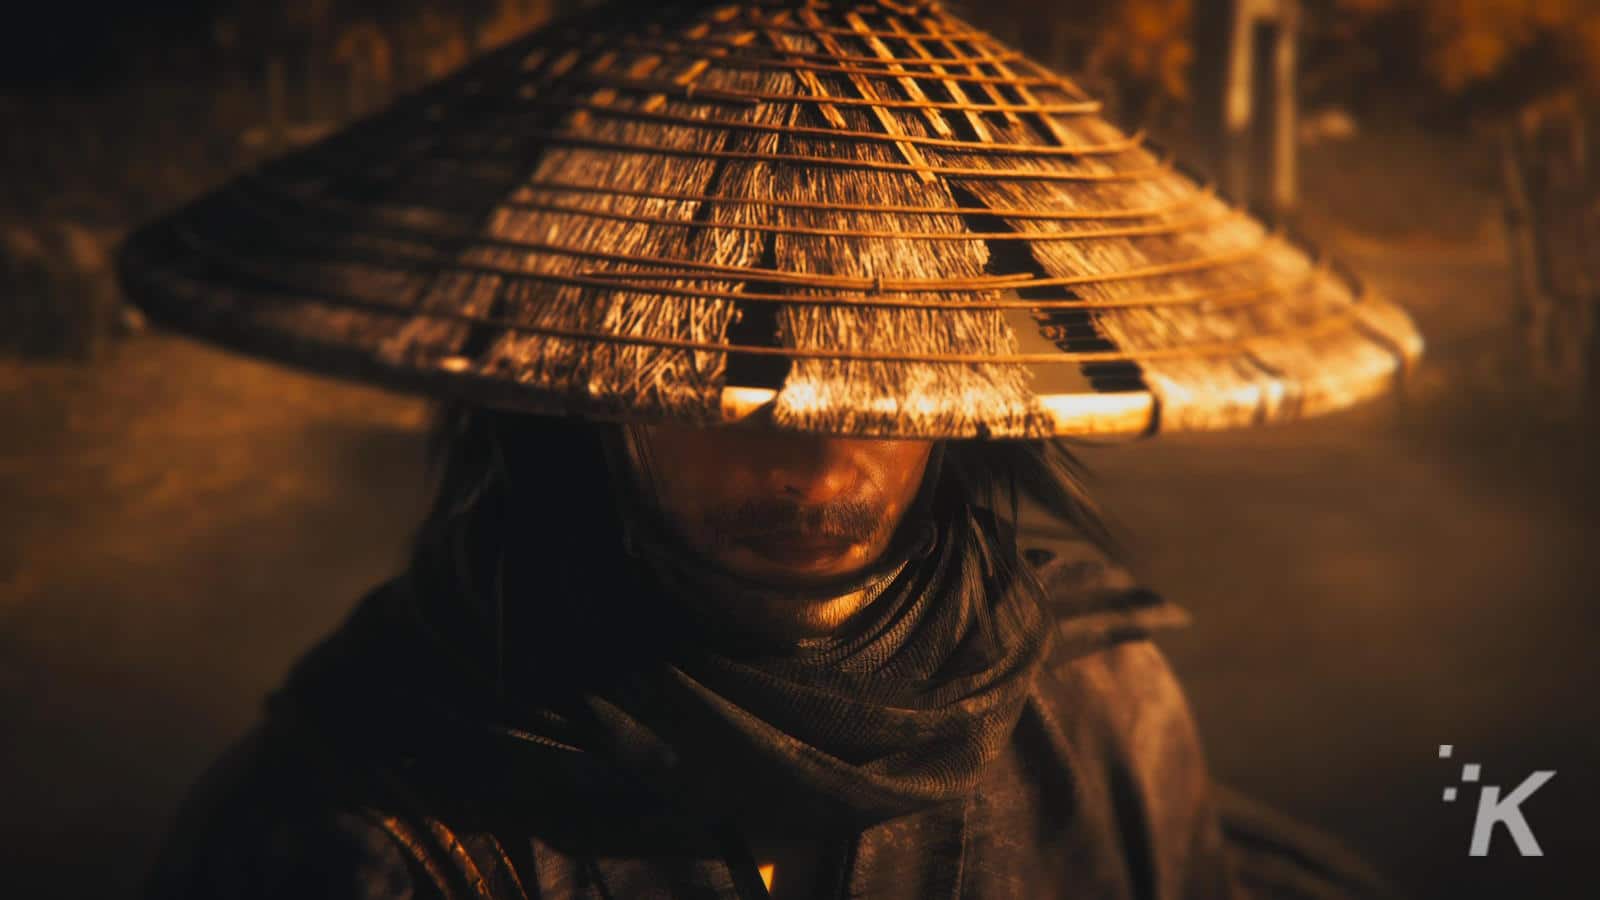 A person wearing a traditional conical asian hat, partly obscuring their face, set against a warm, soft-focus background.